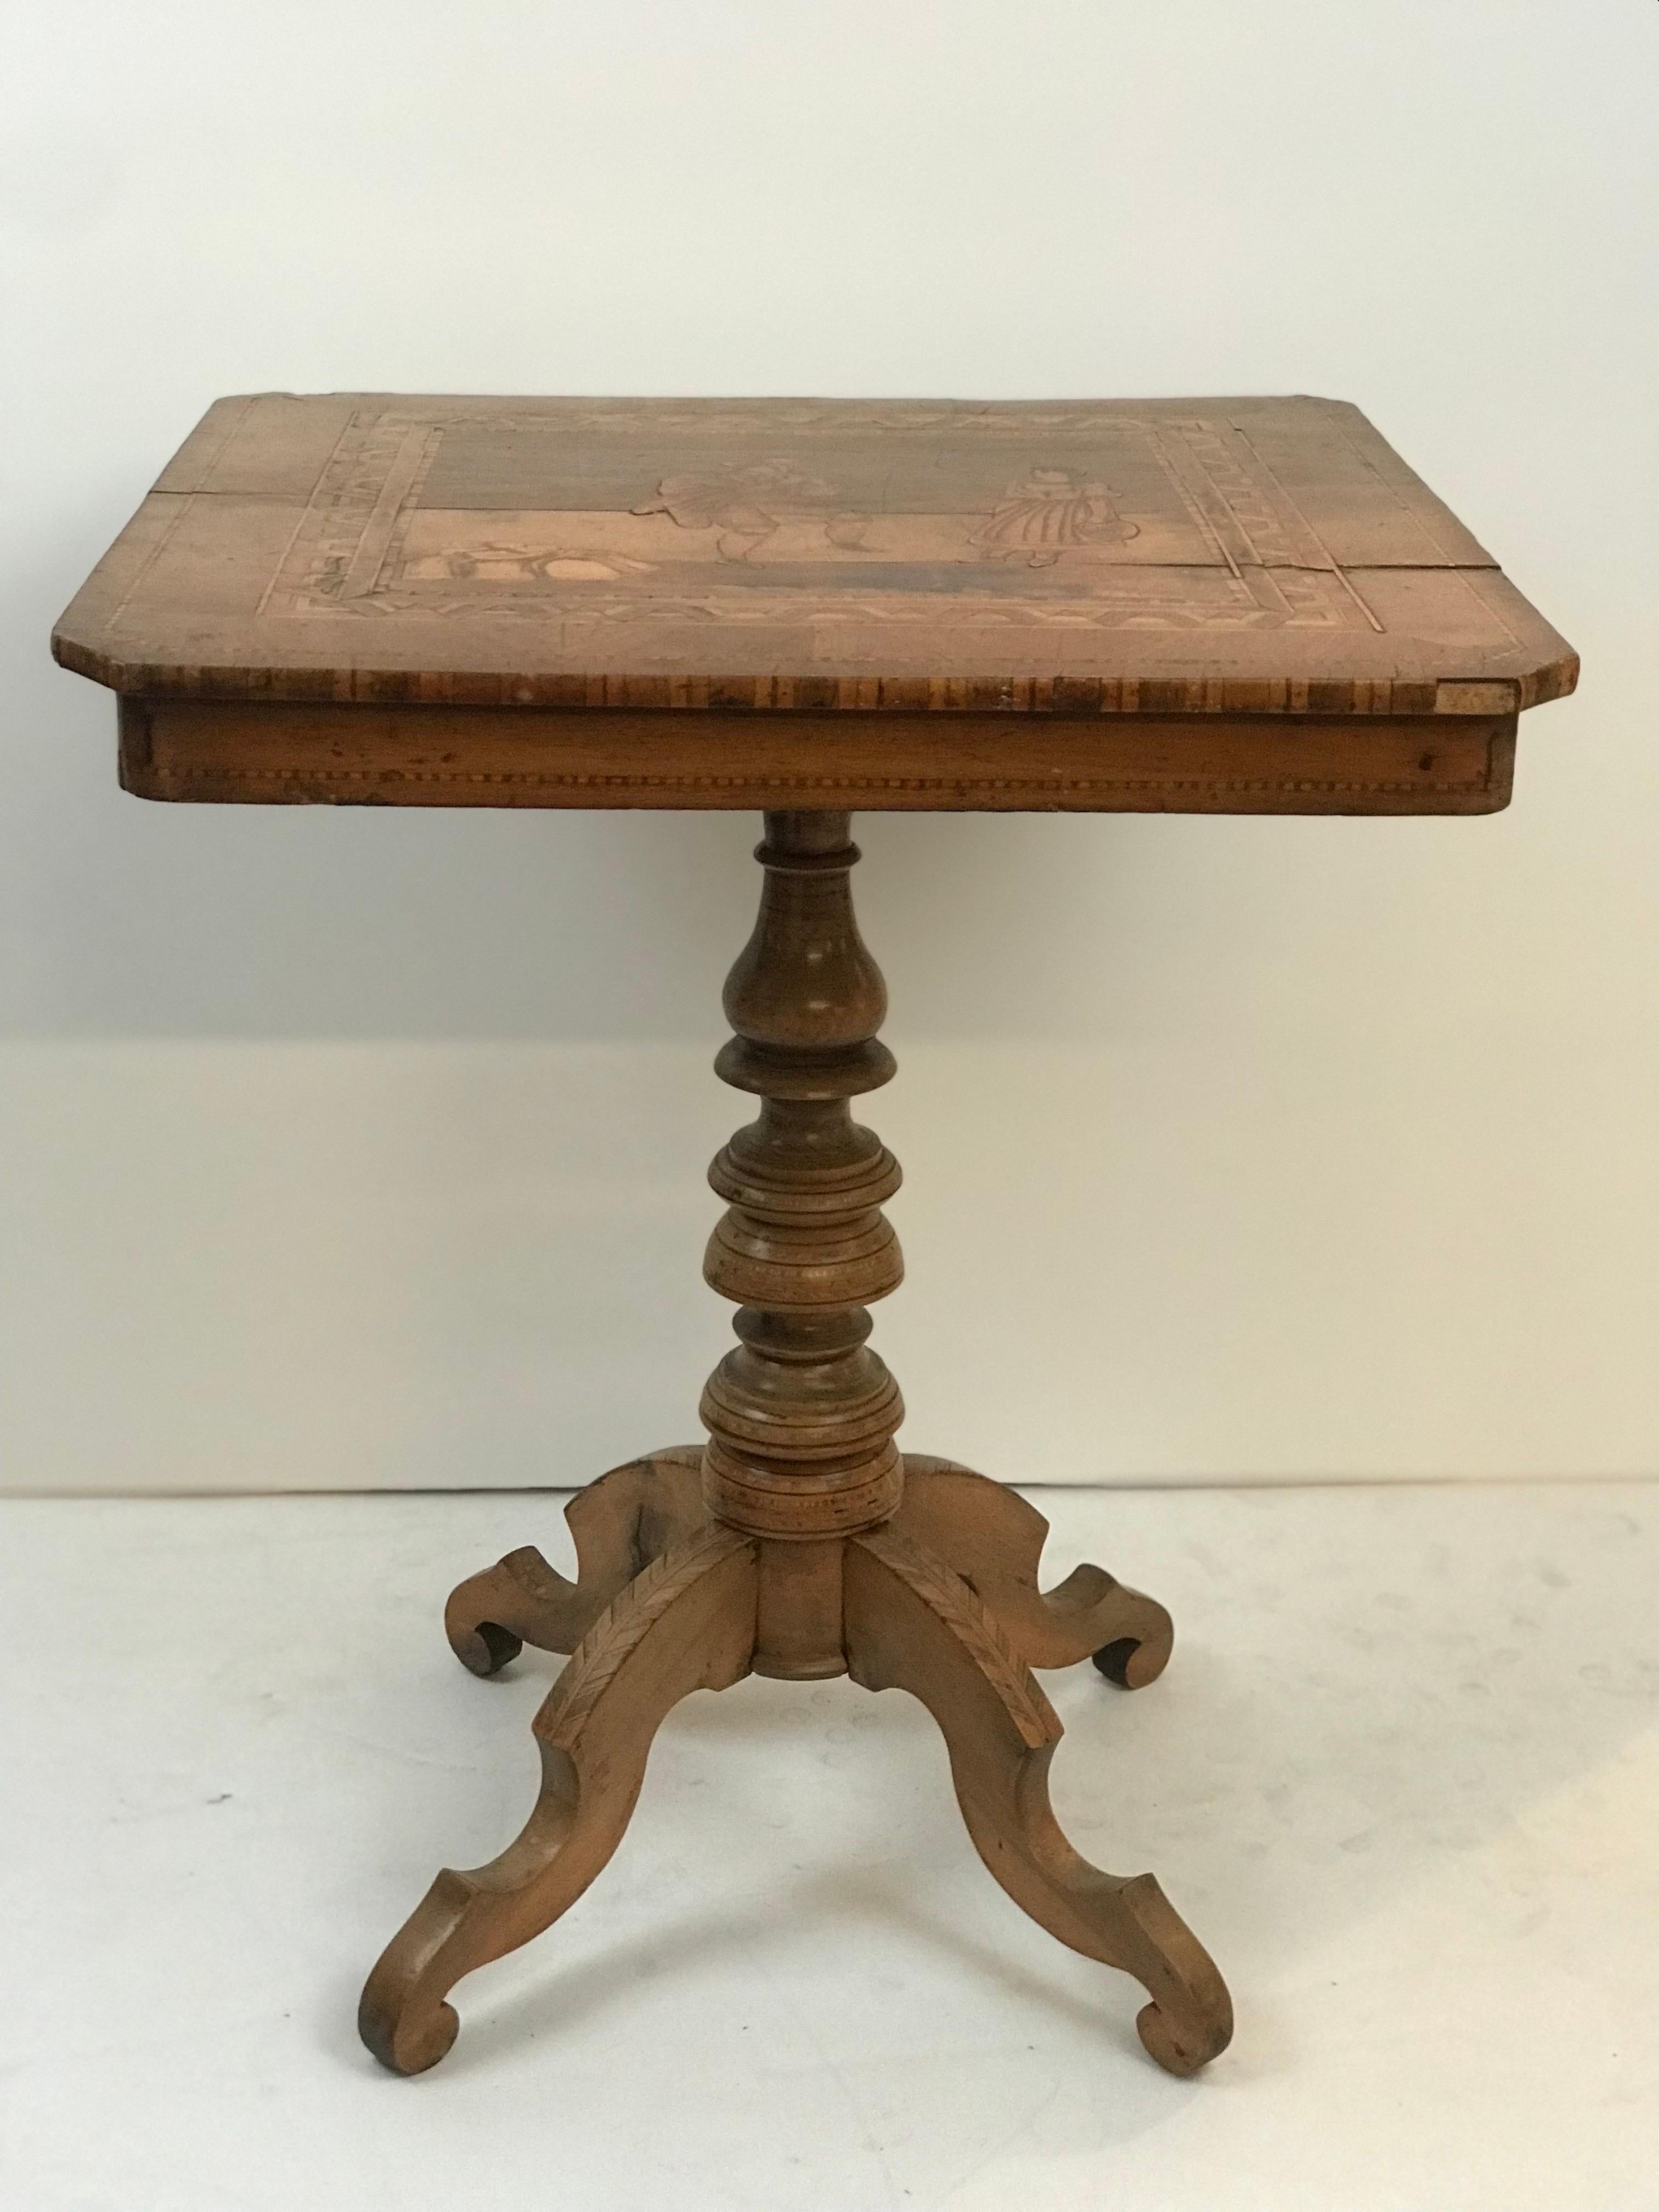 Fruitwood A Late 1800's Sorrento Marquetry Desert Table with Figural Classical Motif  For Sale